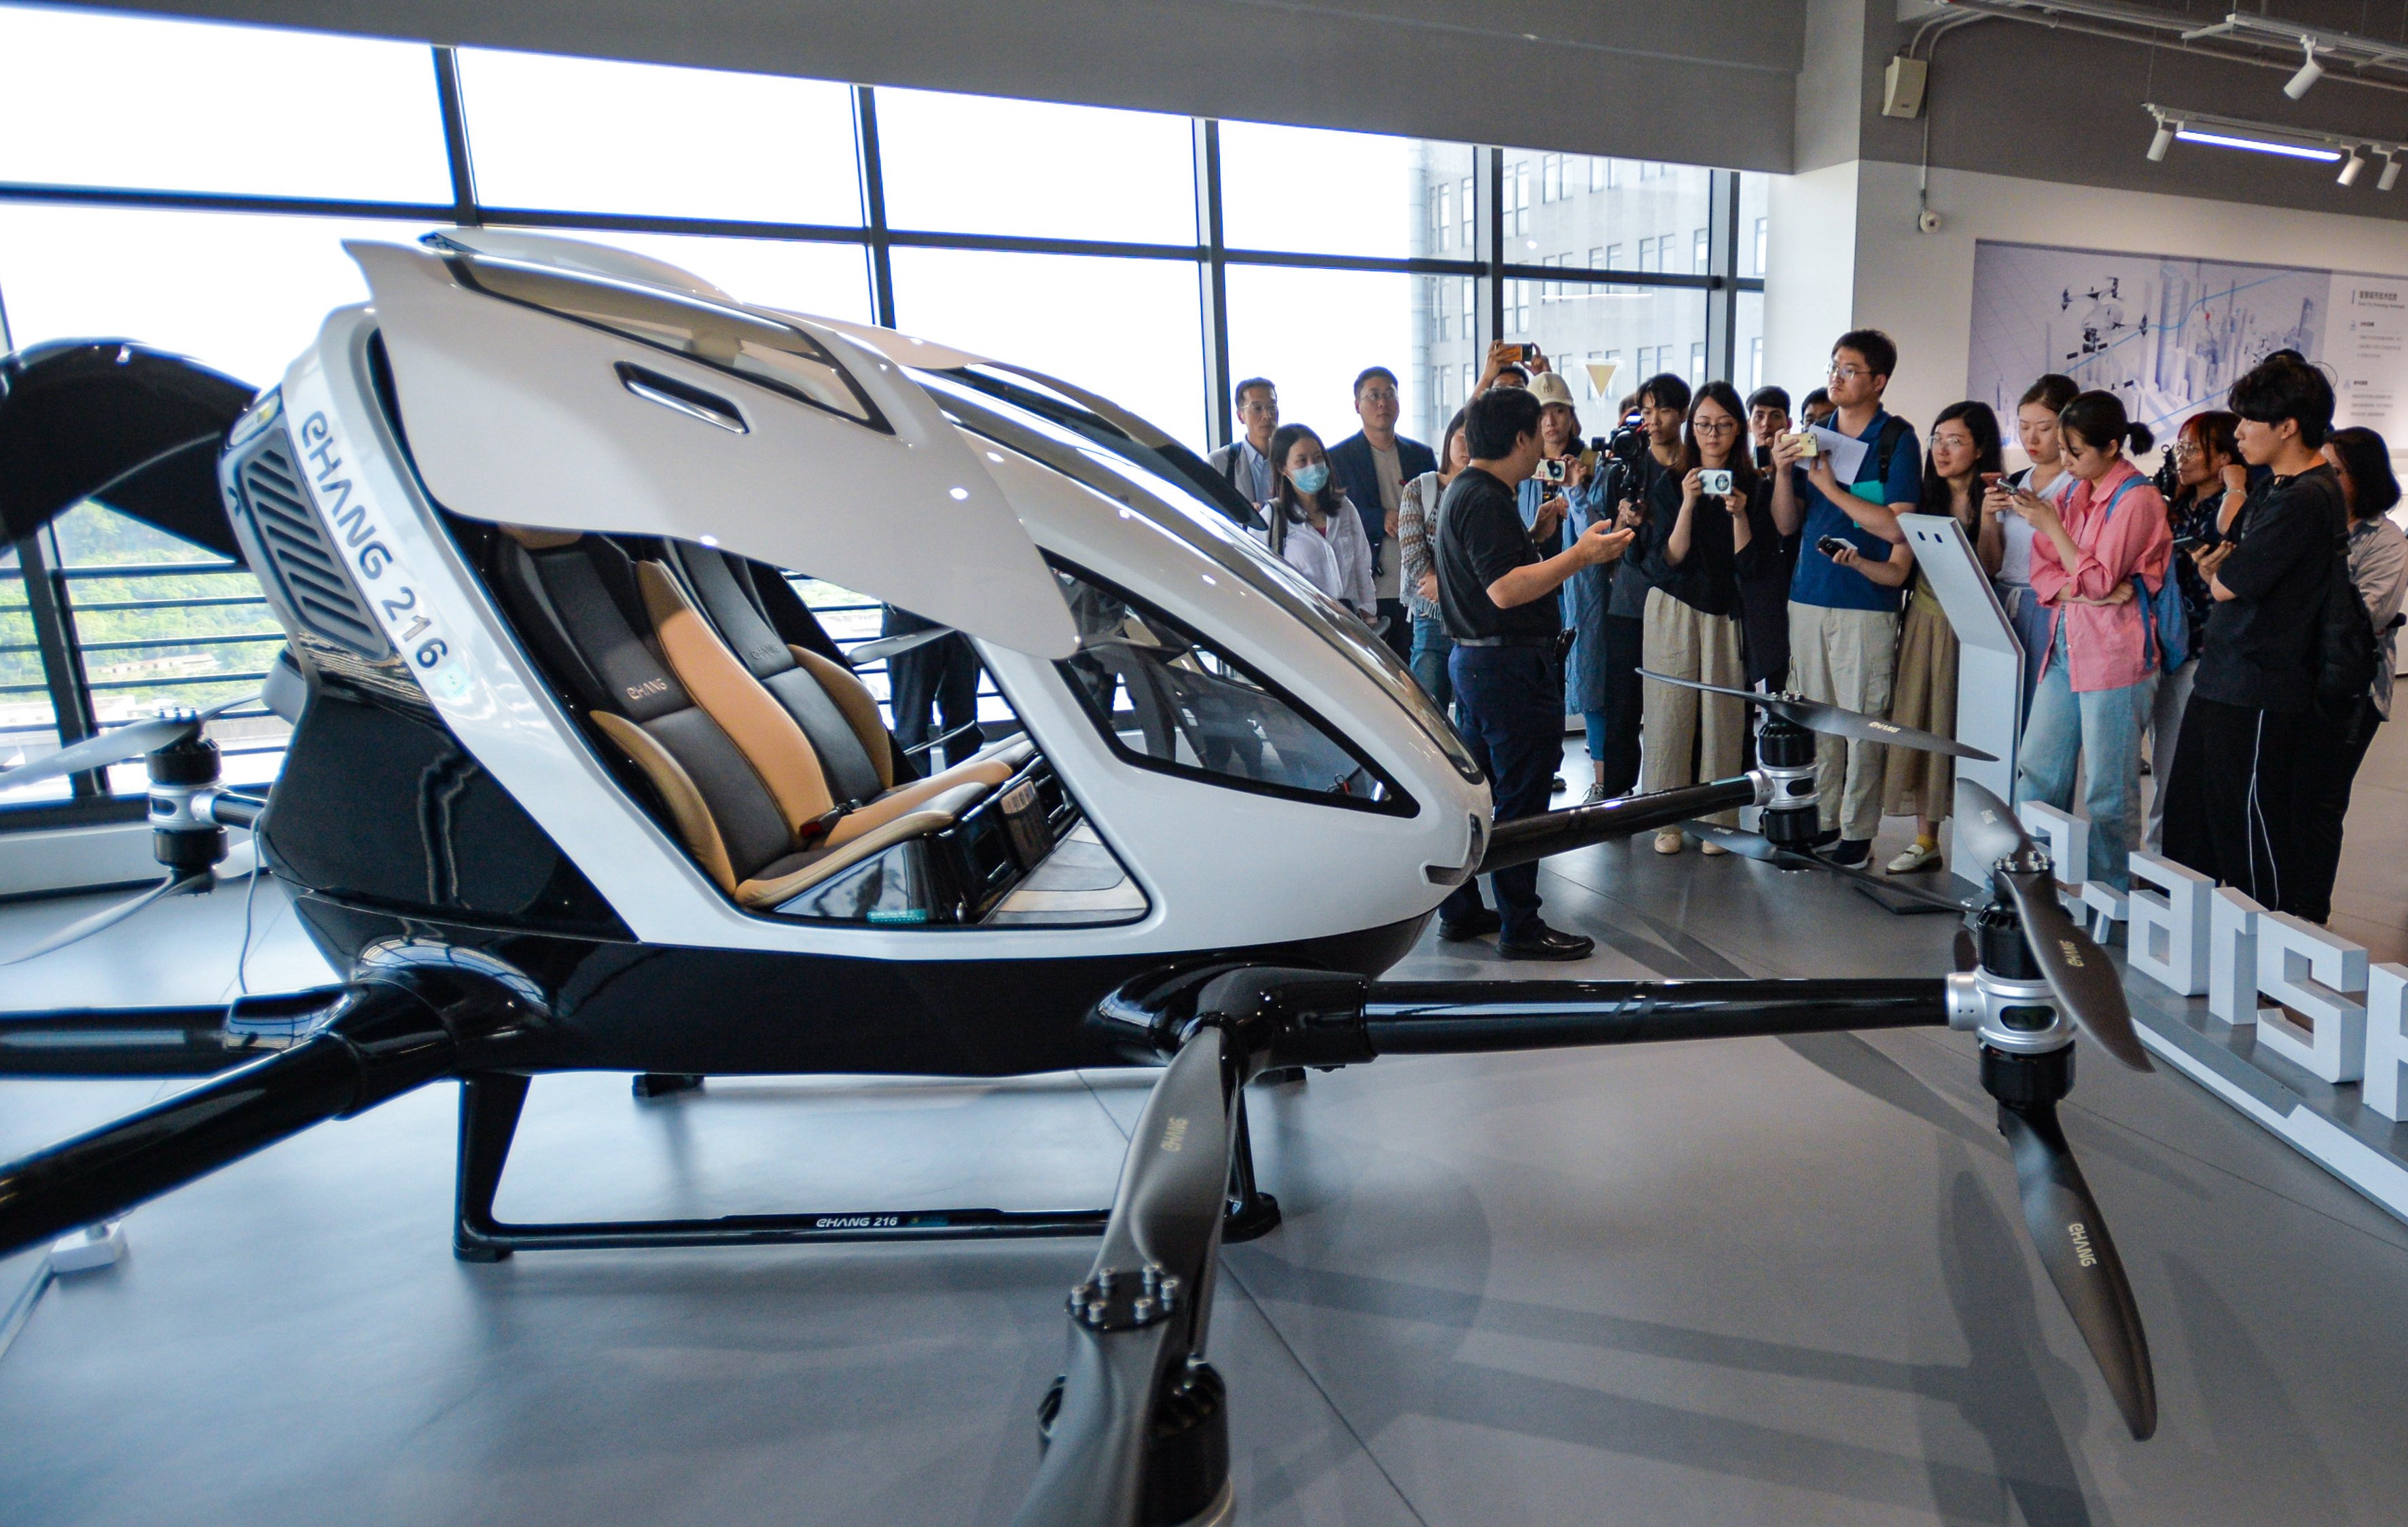 A pilotless passenger drone on display in Guangzhou. One lawmaker has said Hong Kong could use the uncrewed aircraft to take tourists on sightseeing flights. Photo: Xinhua